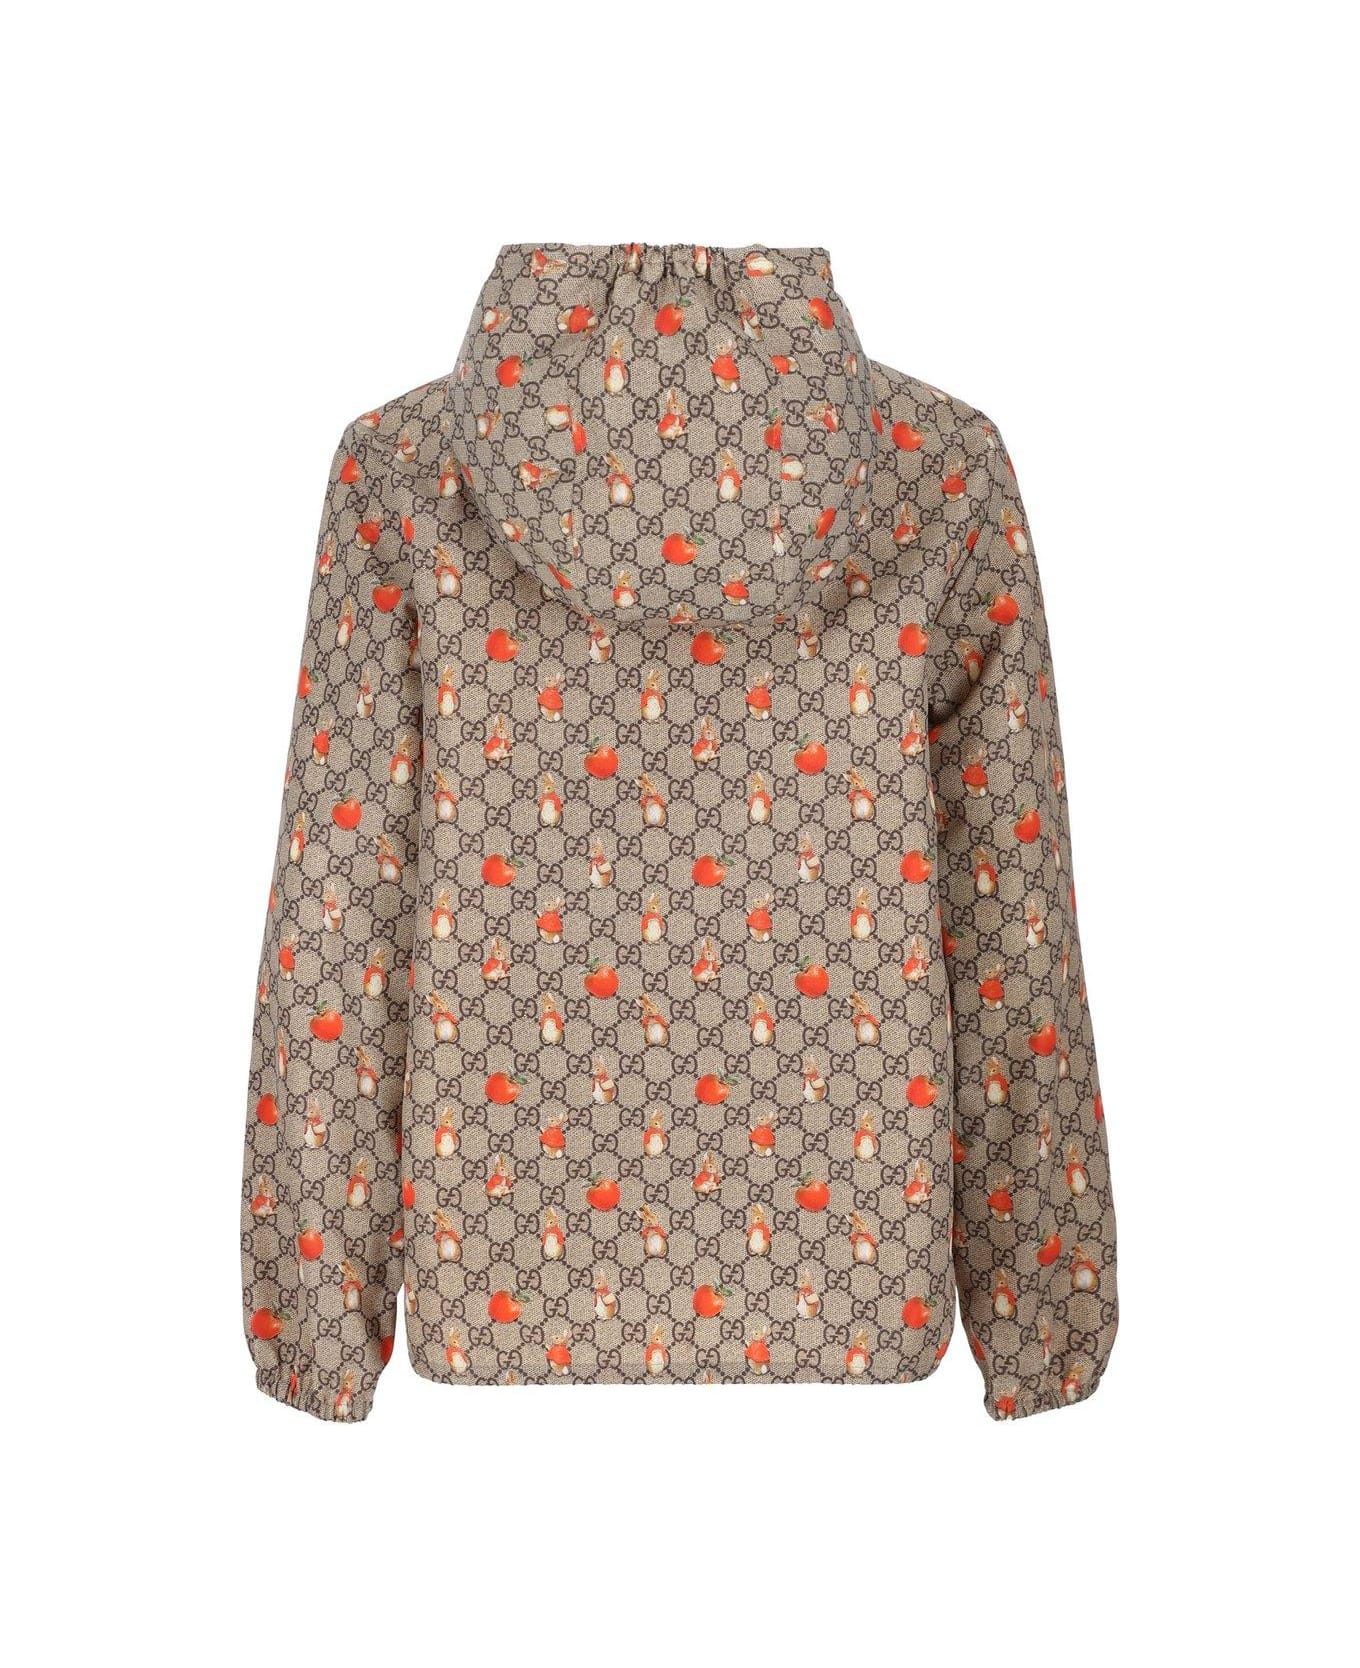 Gucci Allover Printed Hooded Jacket コート＆ジャケット